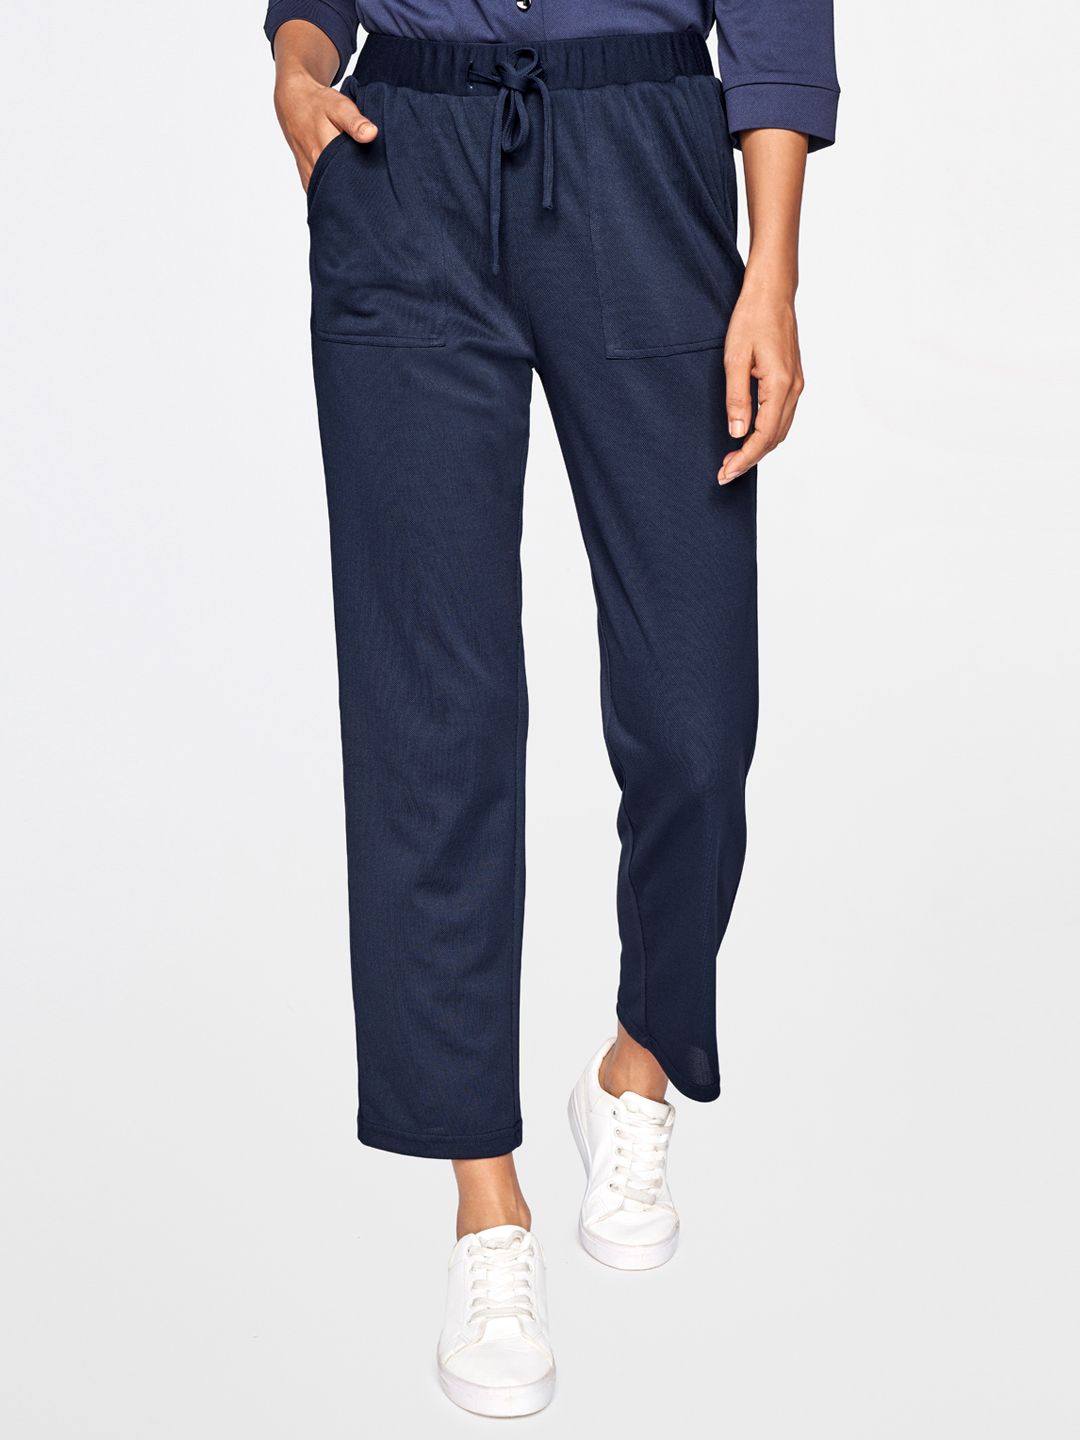 AND Women Navy Blue Tapered Fit High-Rise Trousers Price in India